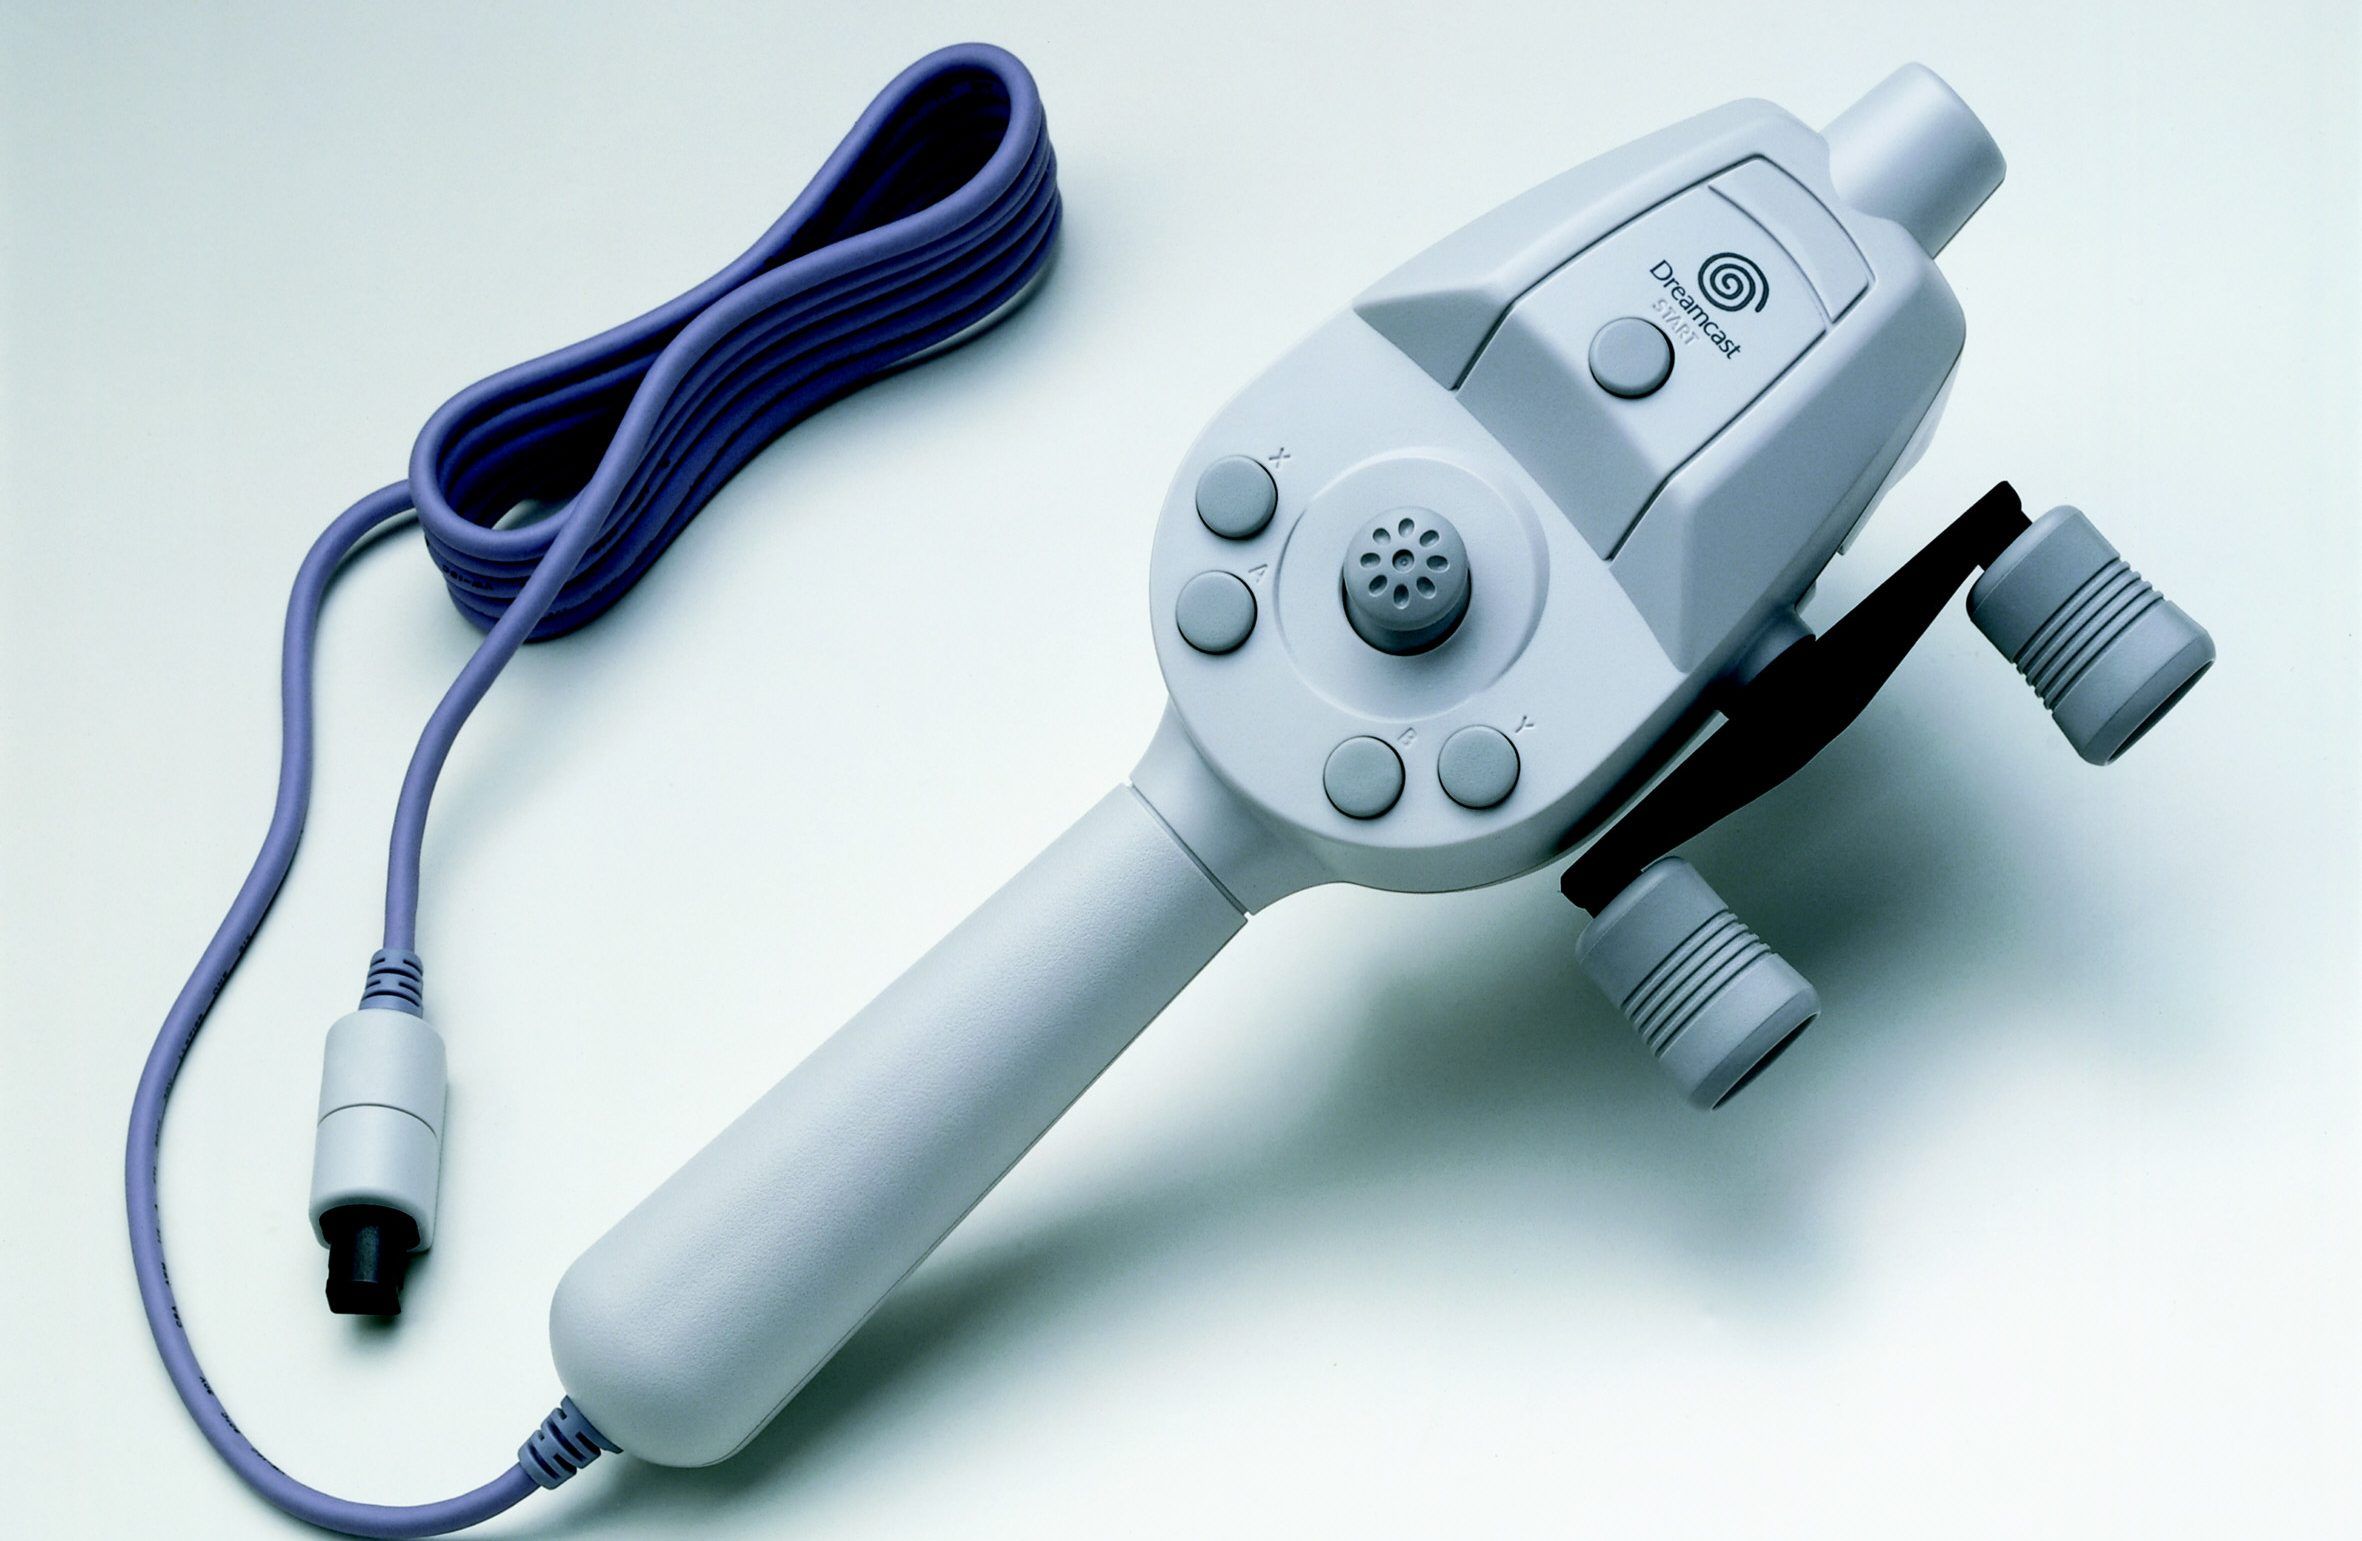 10 Of The Weirdest Video Game Controllers